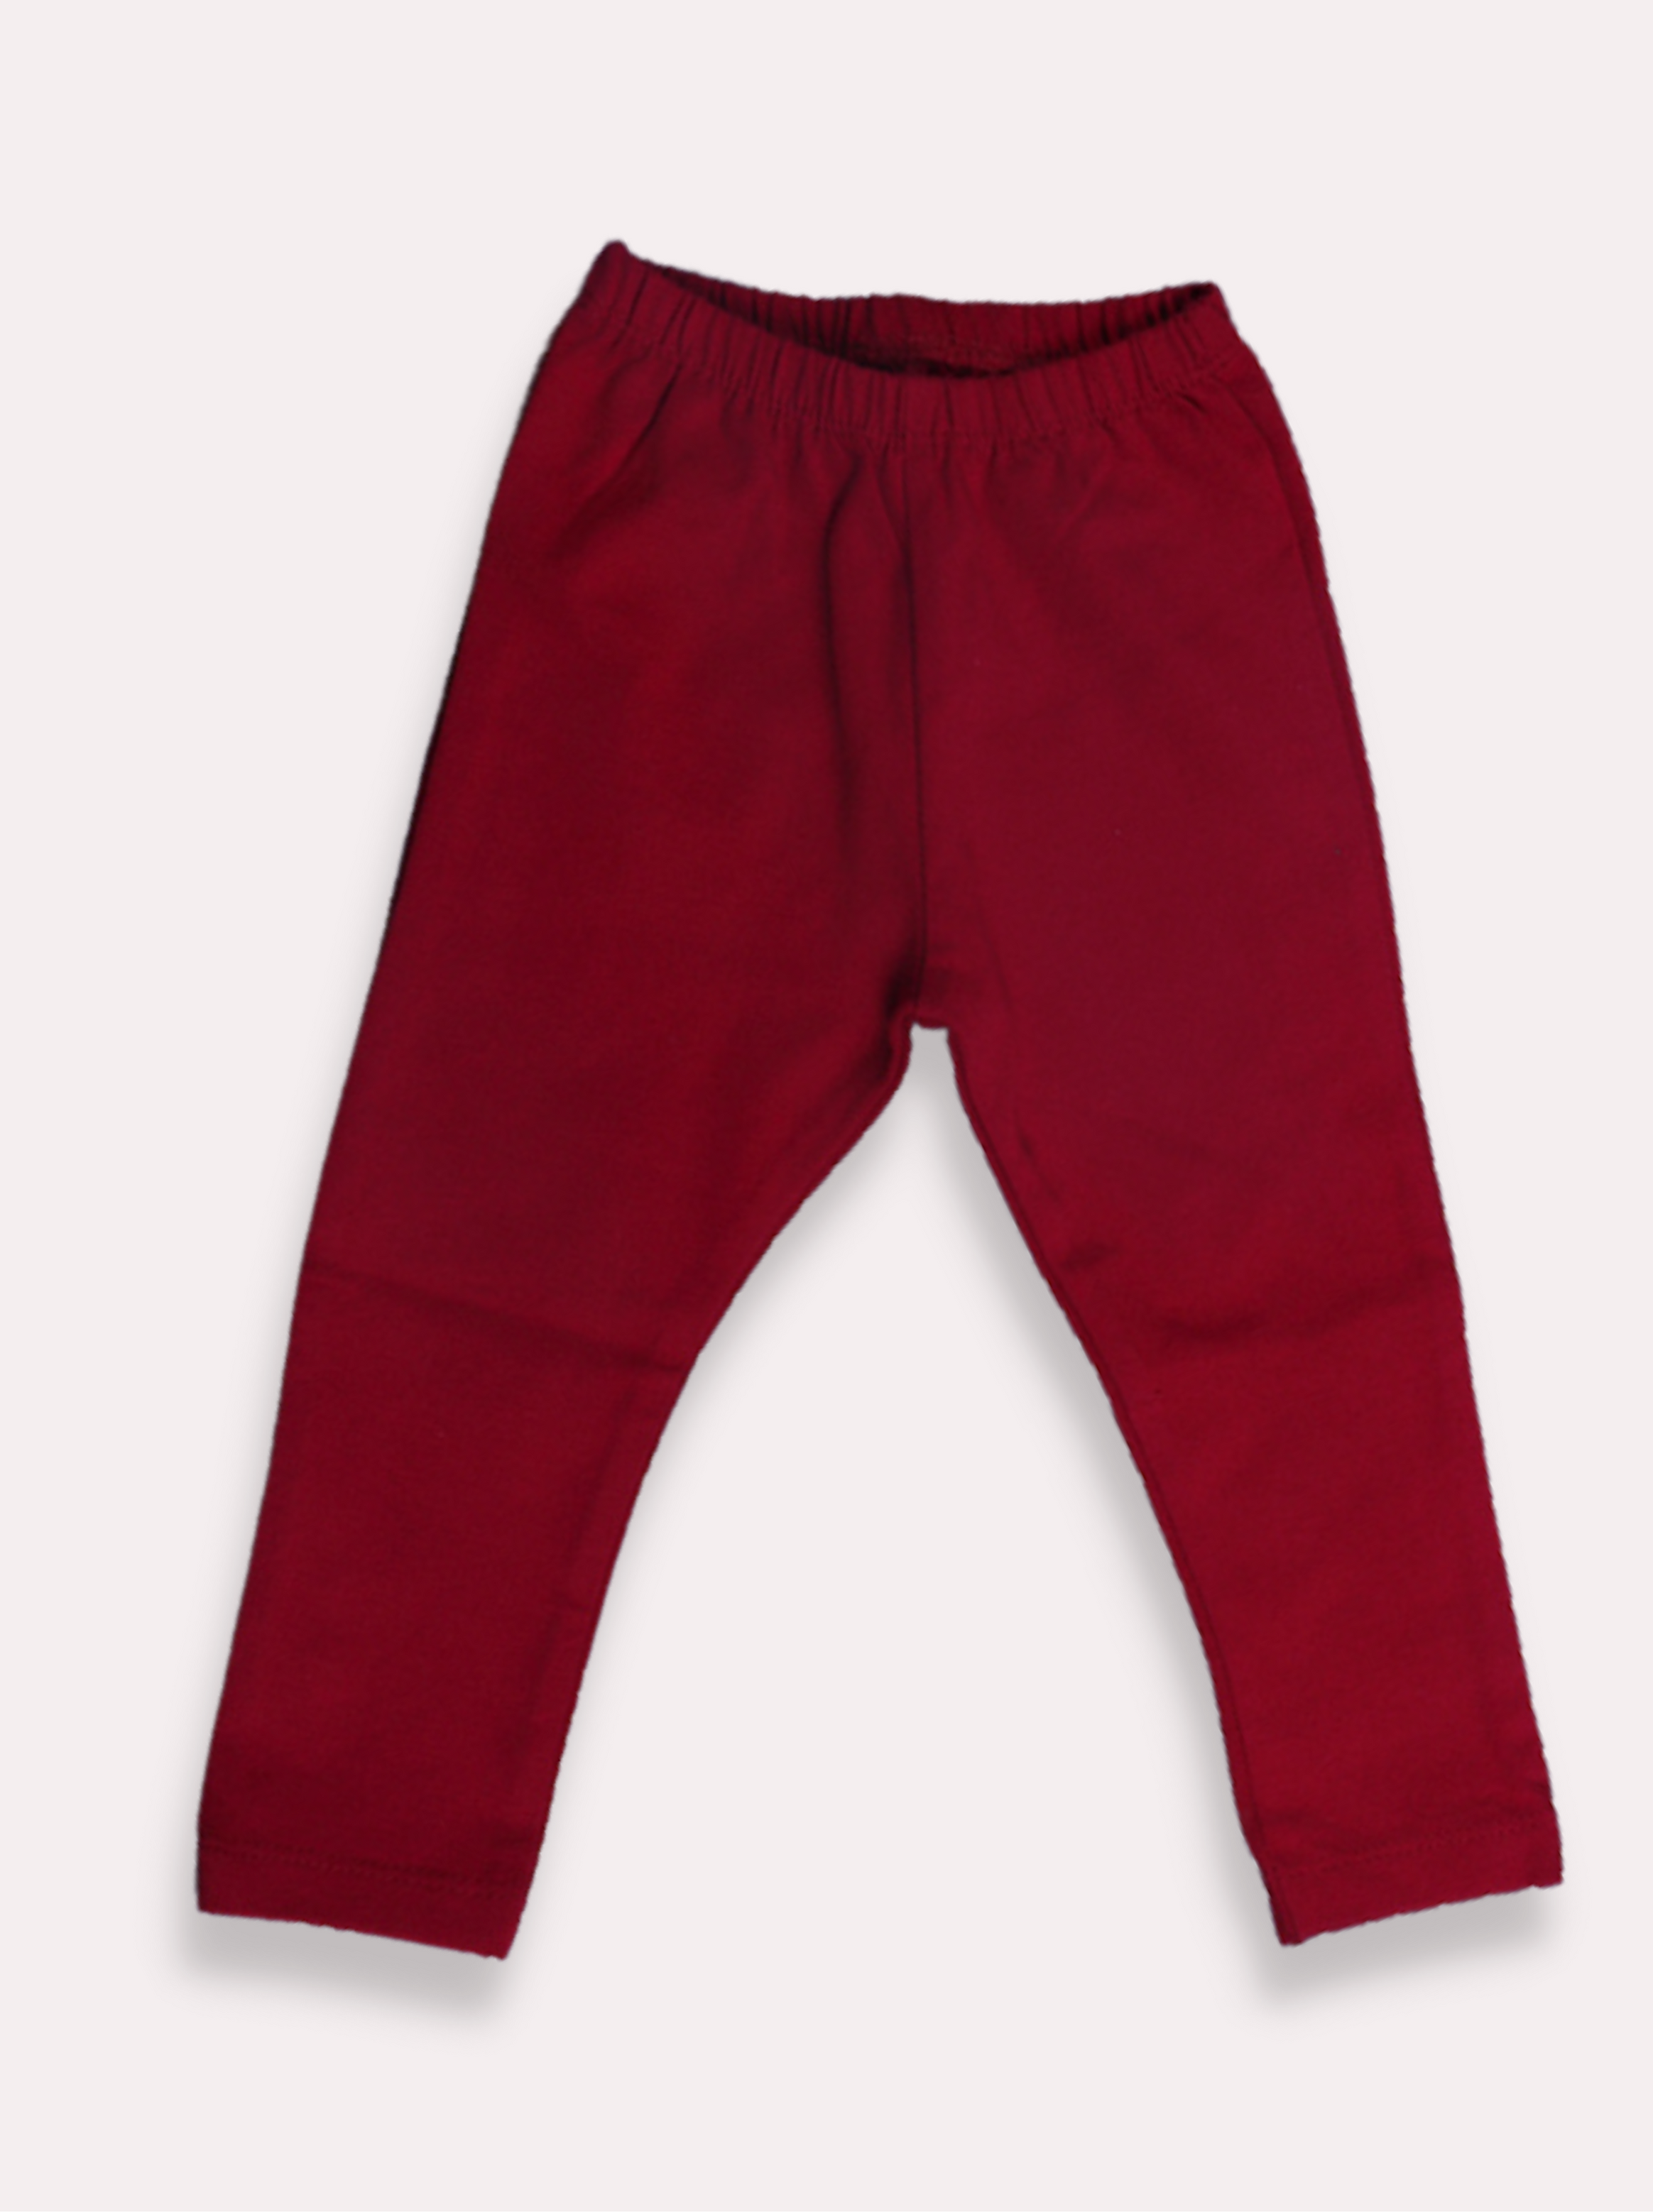 Kids Red Cotton jersey knit Solid Pant